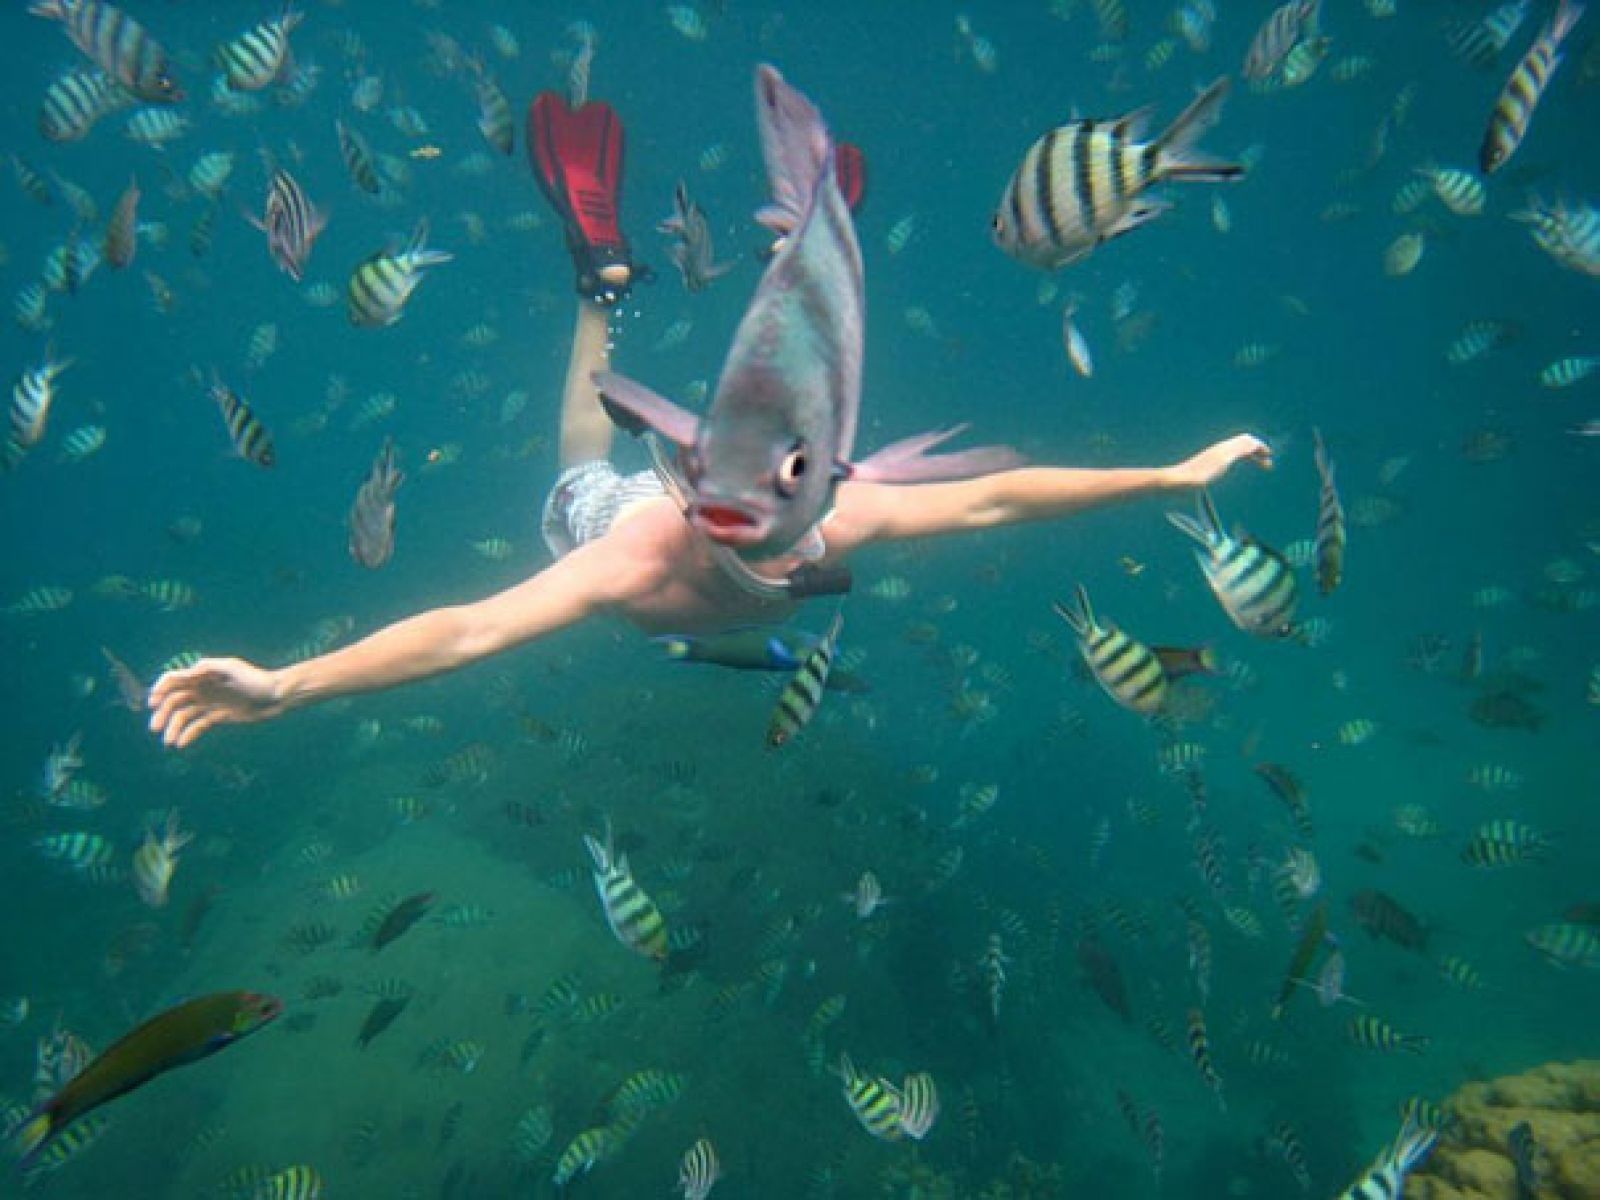 I thought Merman have a body of a fish... I was clearly wrong!